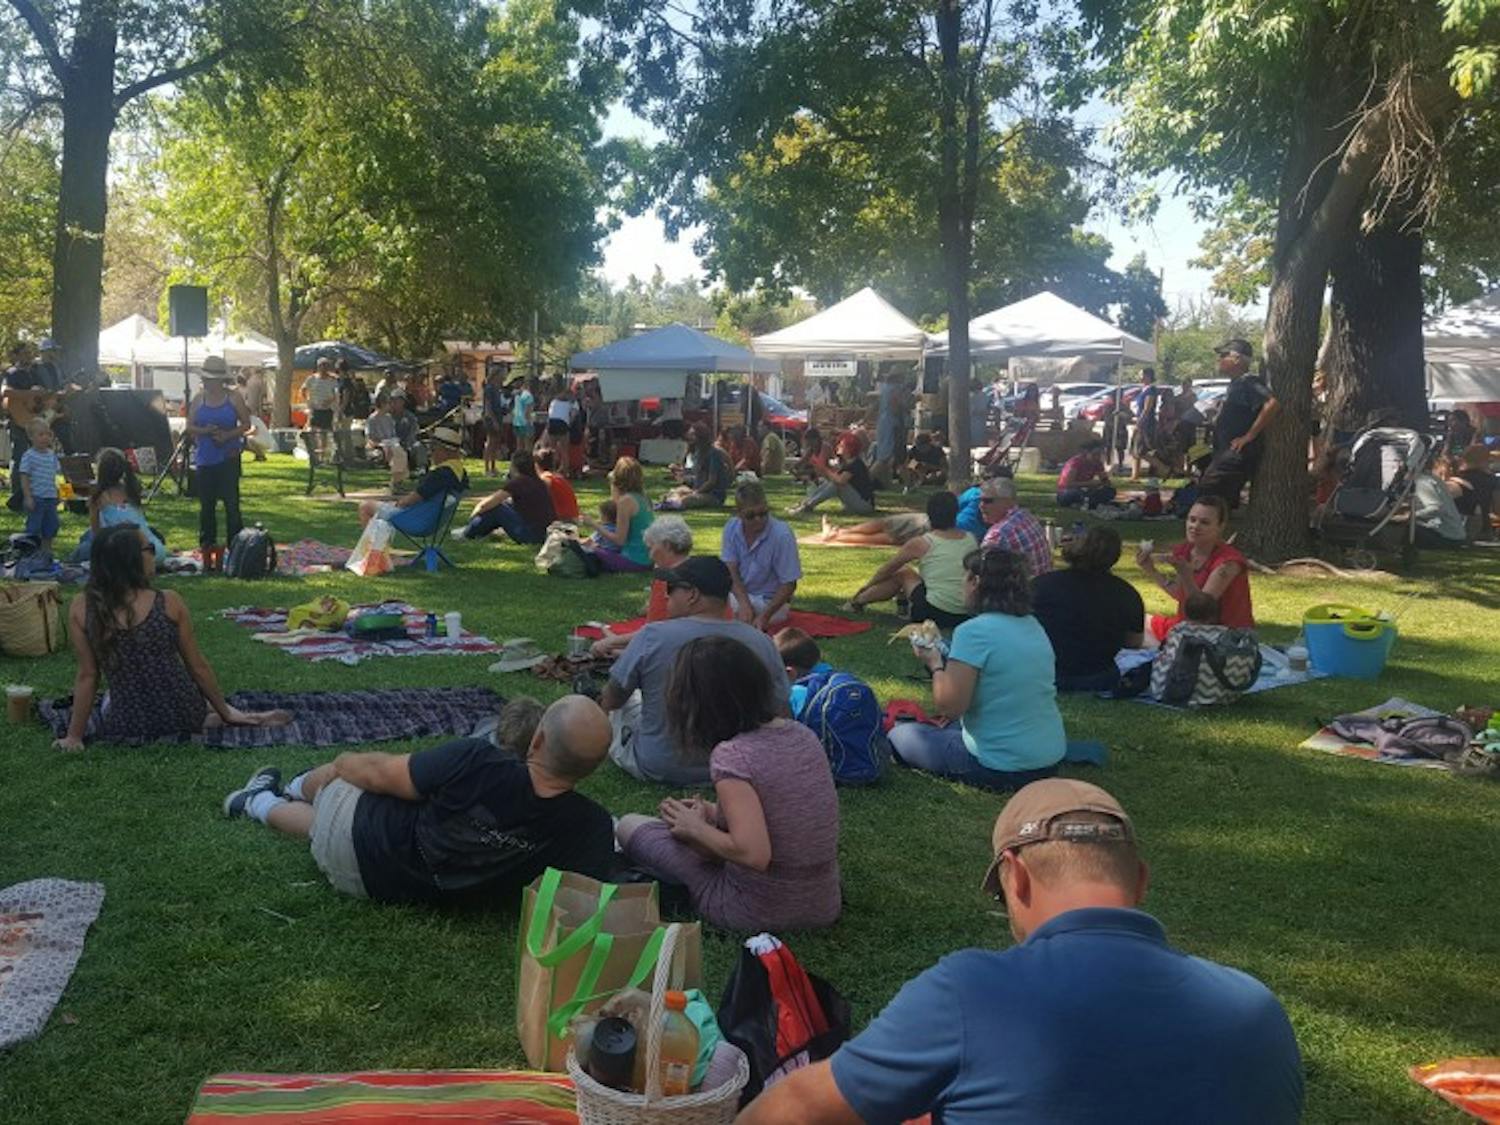 People sit and listen to a band play at the Downtown Growers Market at Robinson Park.